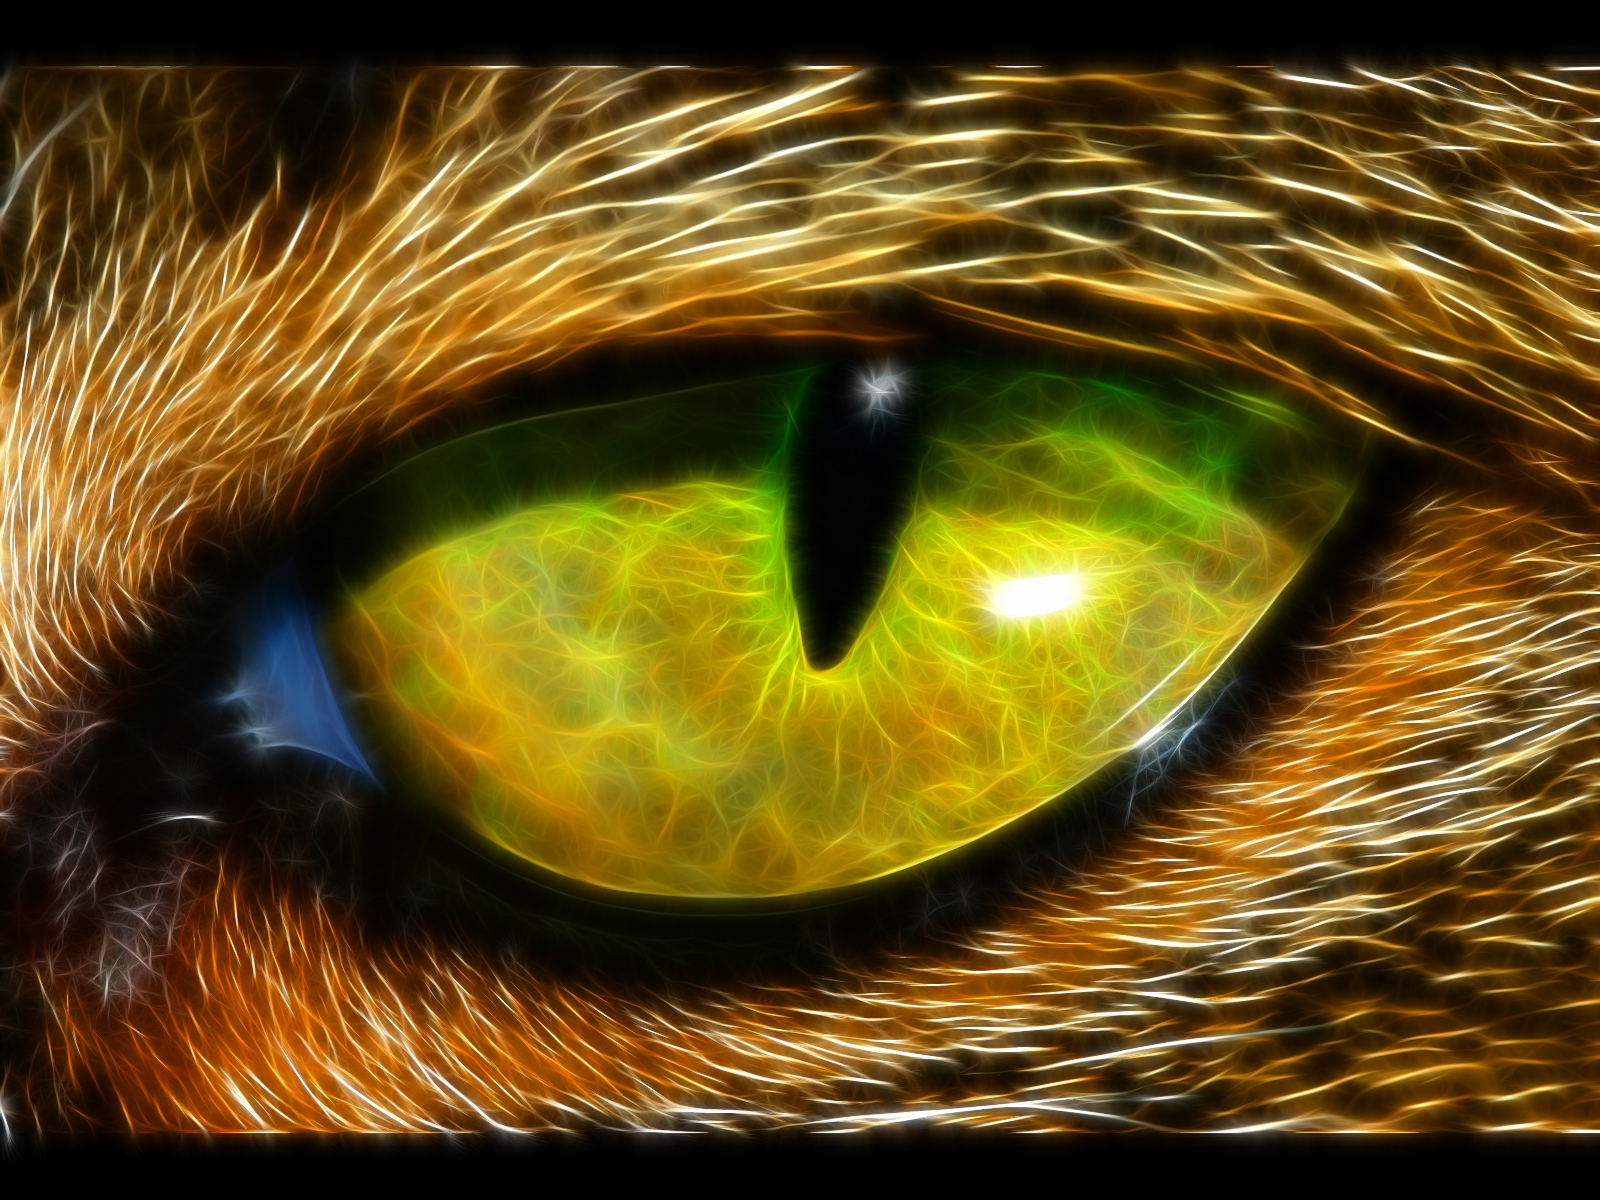 Animal Eye Pictures